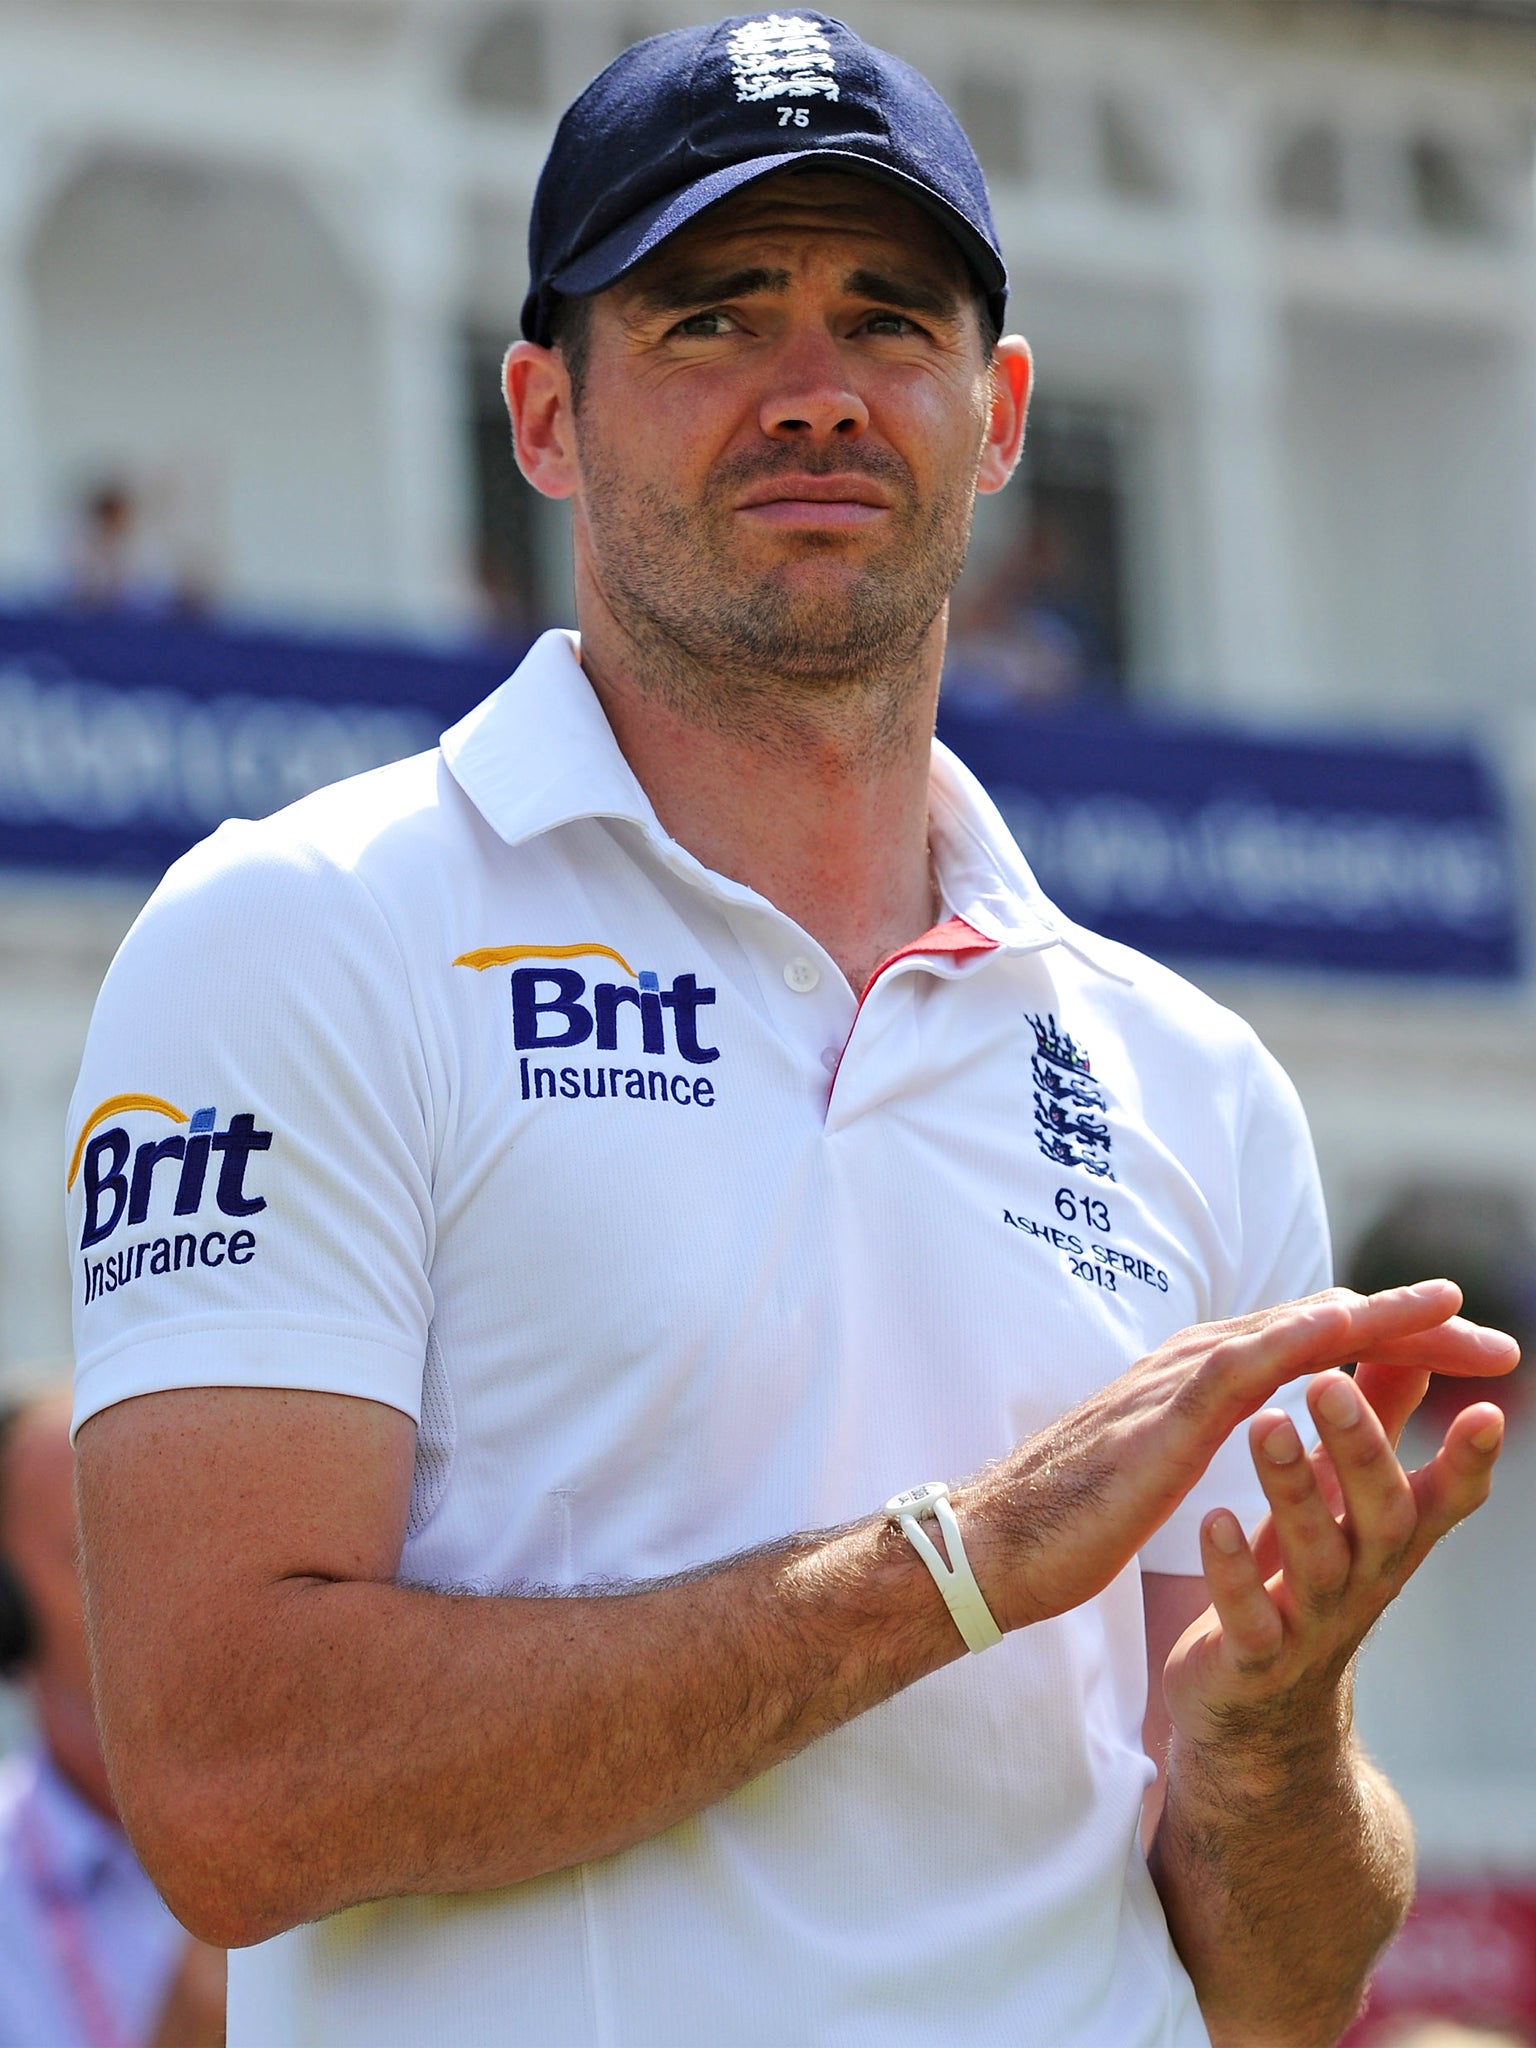 The fast bowler has admitted England can still improve in several areas